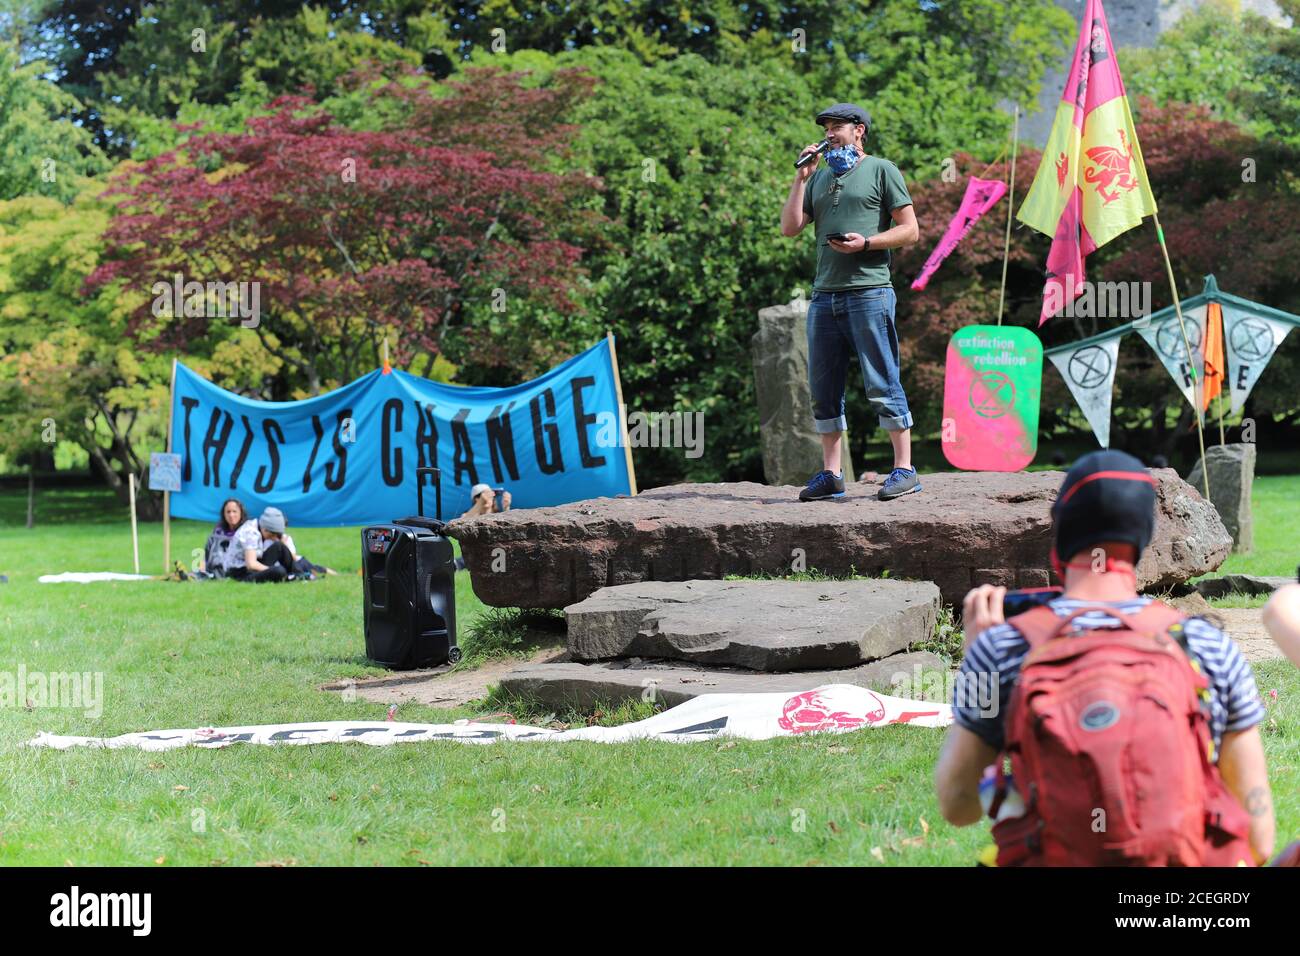 Cardiff, Wales, UK. 1st September 2020. Extinction Rebellion protestors take over Cardiff and march on the Senedd to demand a green recovery and passing of the CEE Bill on day one of a week of action. Speeches are held in Bute Park welcoming protestors Credit: Denise Laura Baker/Alamy Live News Stock Photo